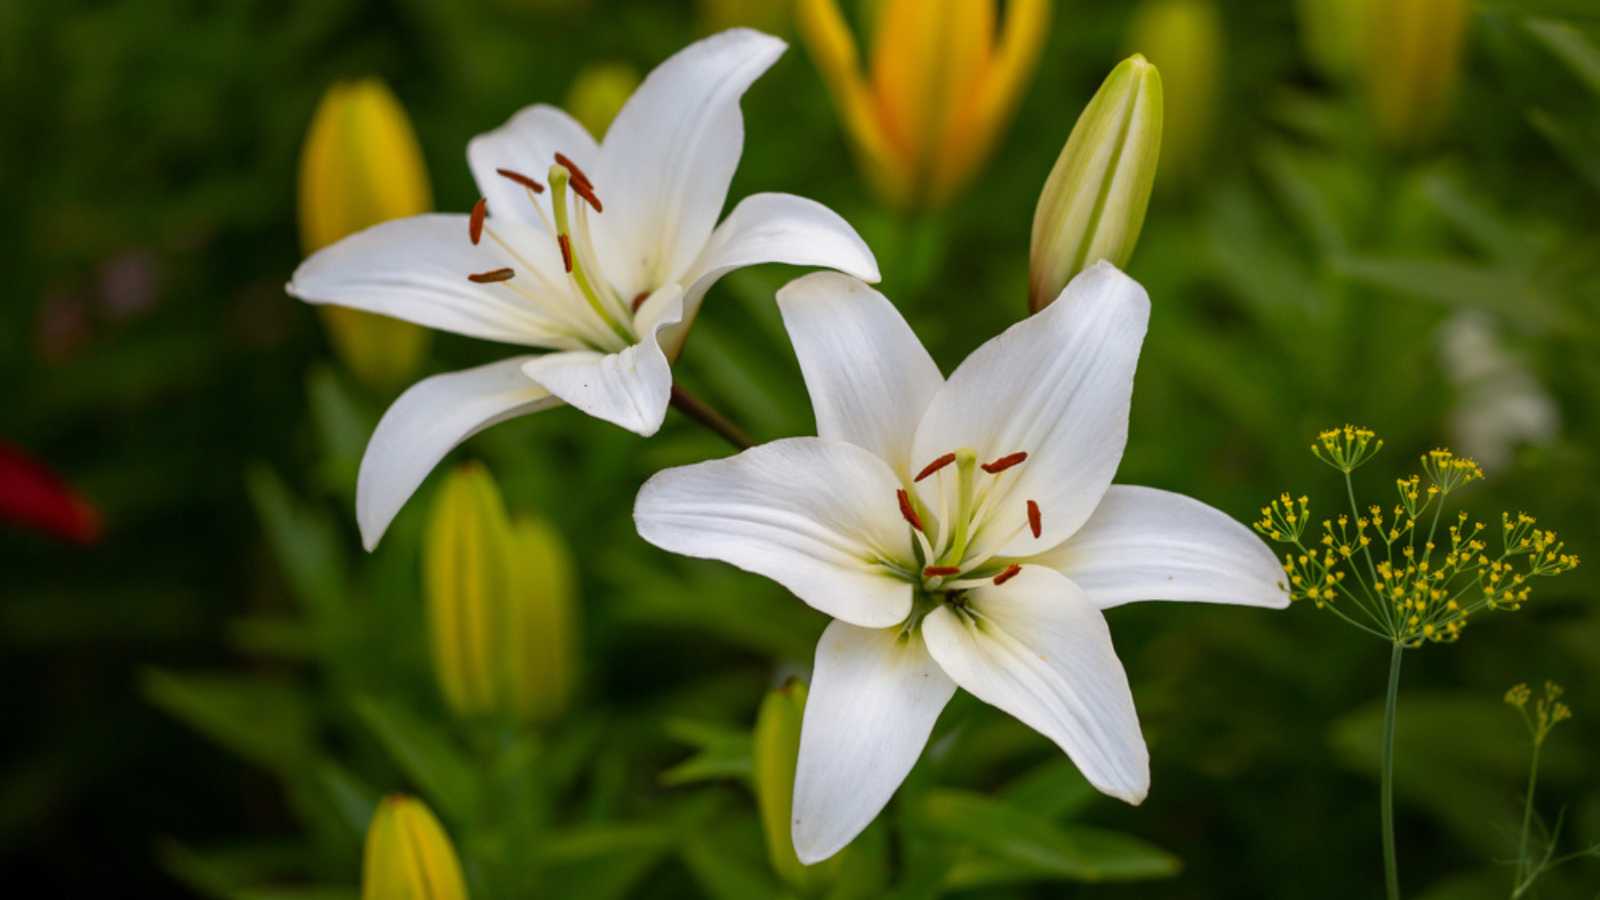 Two white lilies macro photography in summer day. Beauty garden lily with white petals close up garden photography. Lilium plant floral wallpaper on a green background.